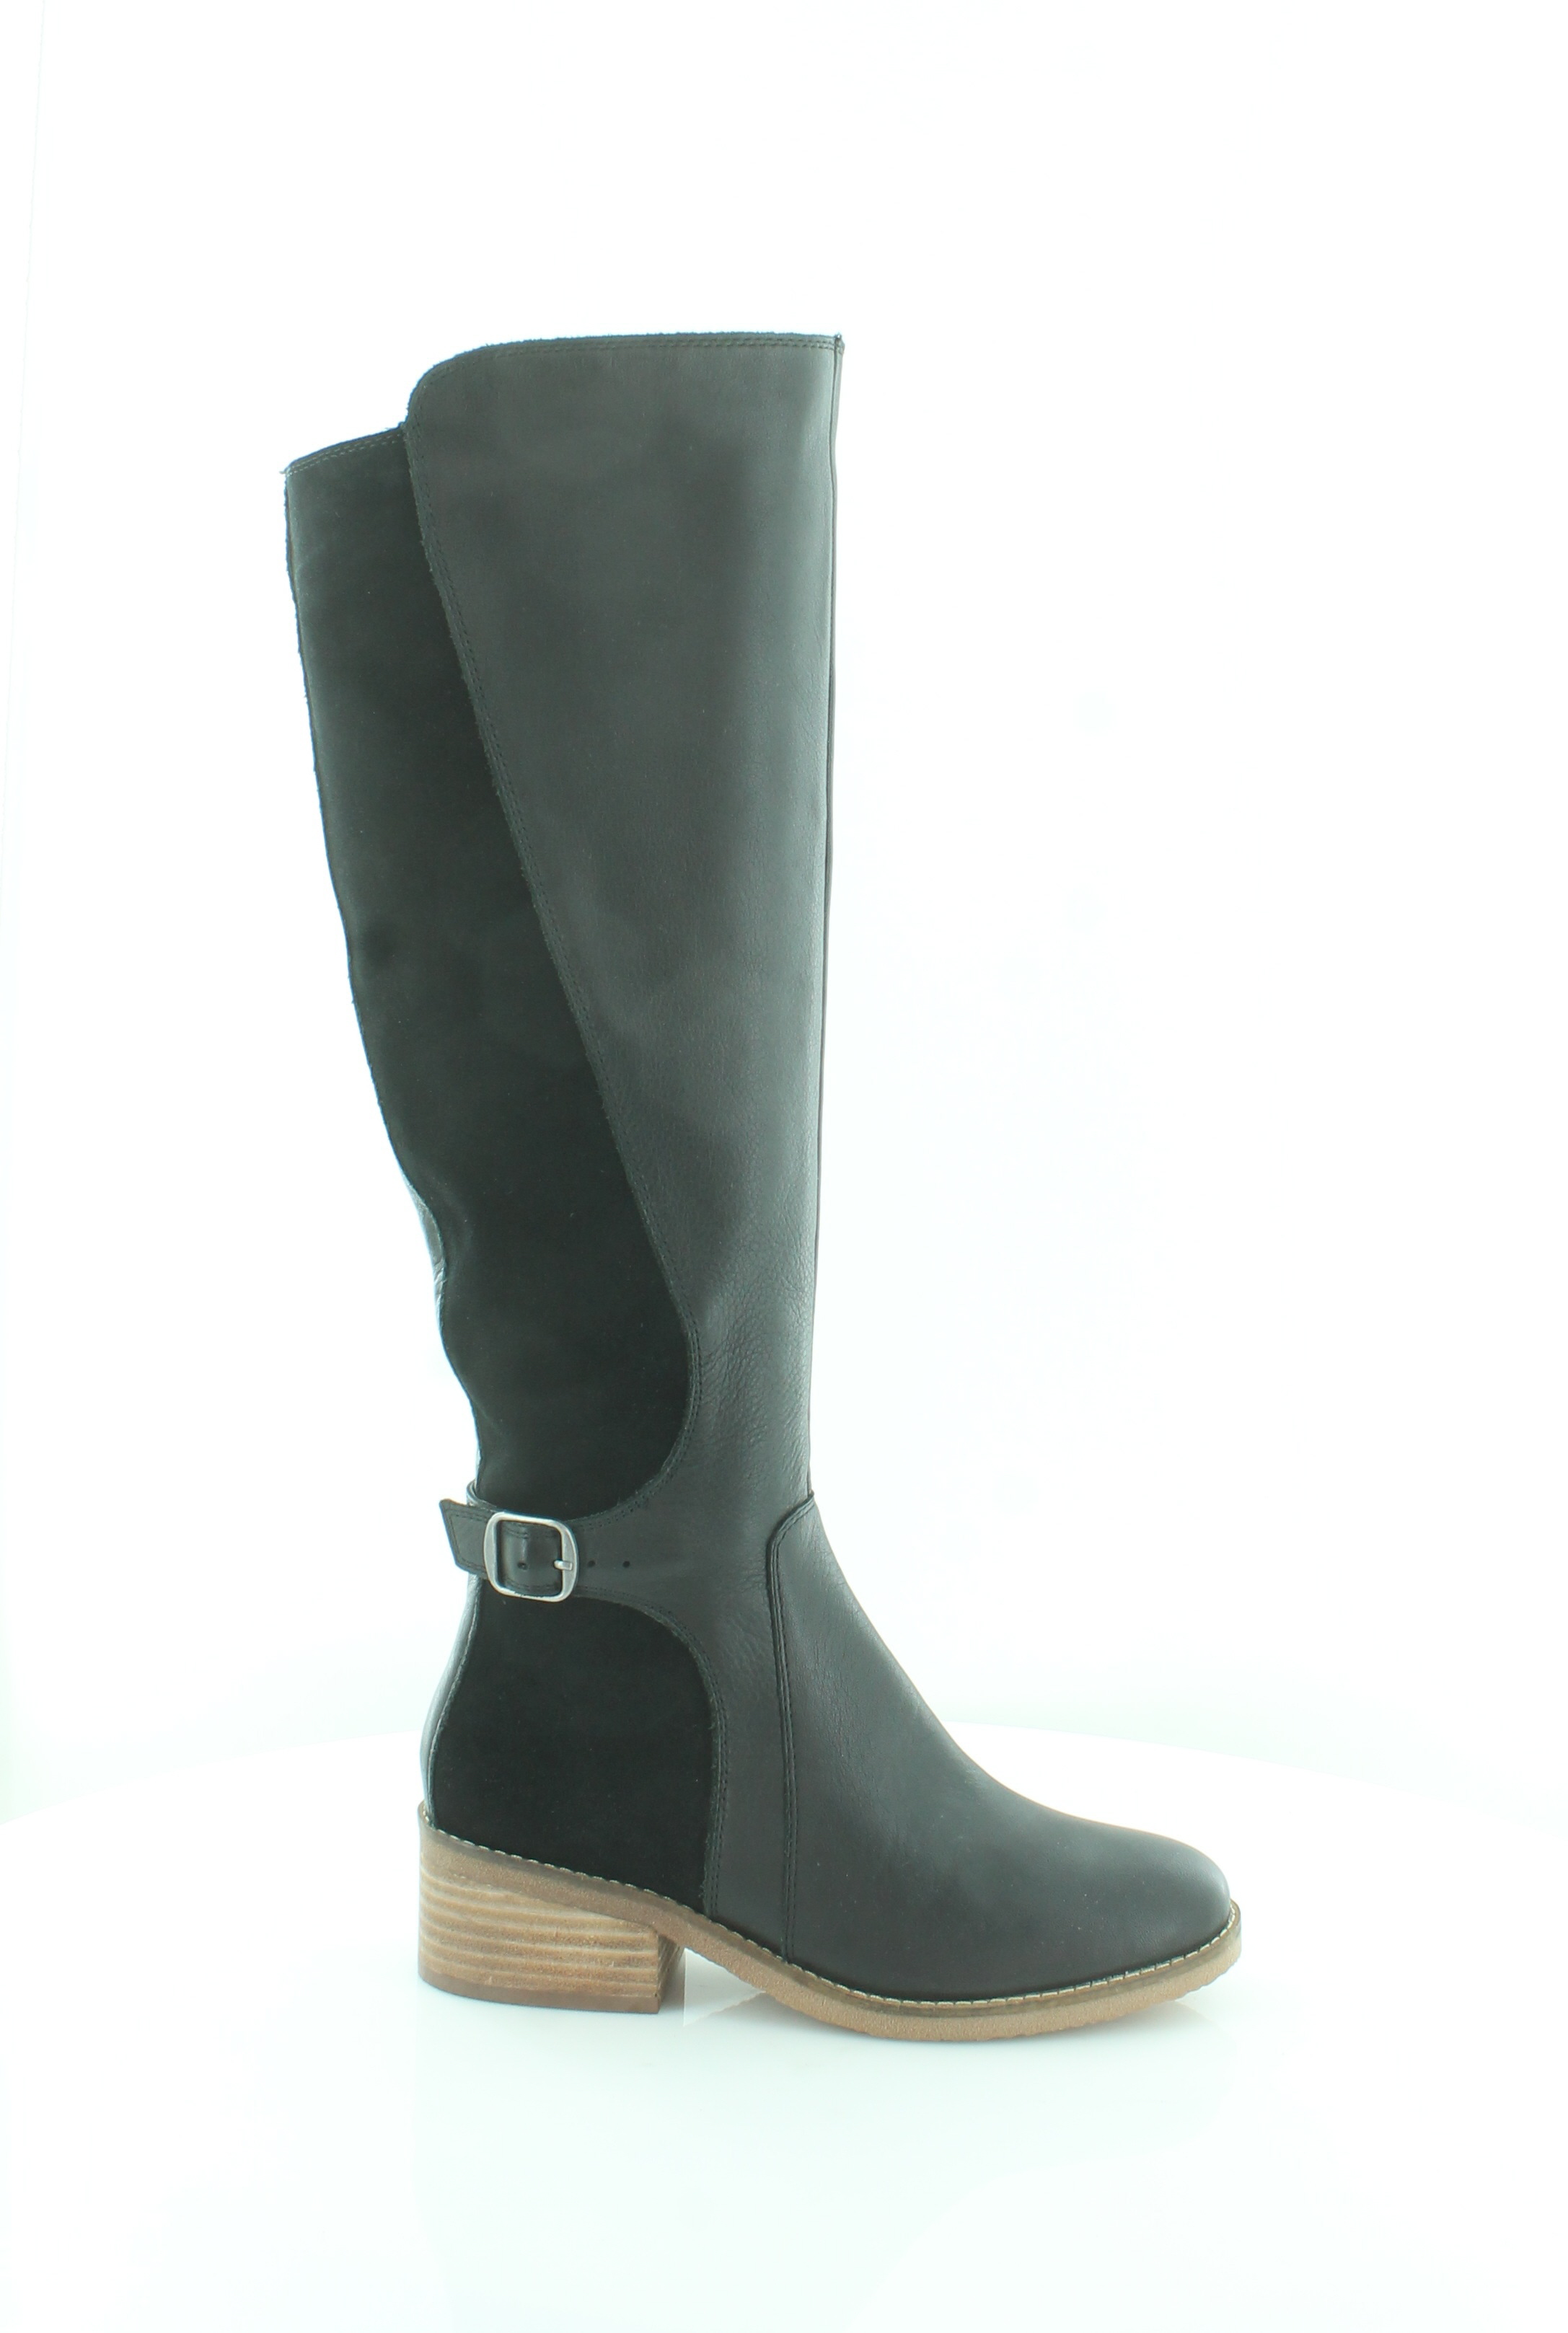 lucky brand timinii boots